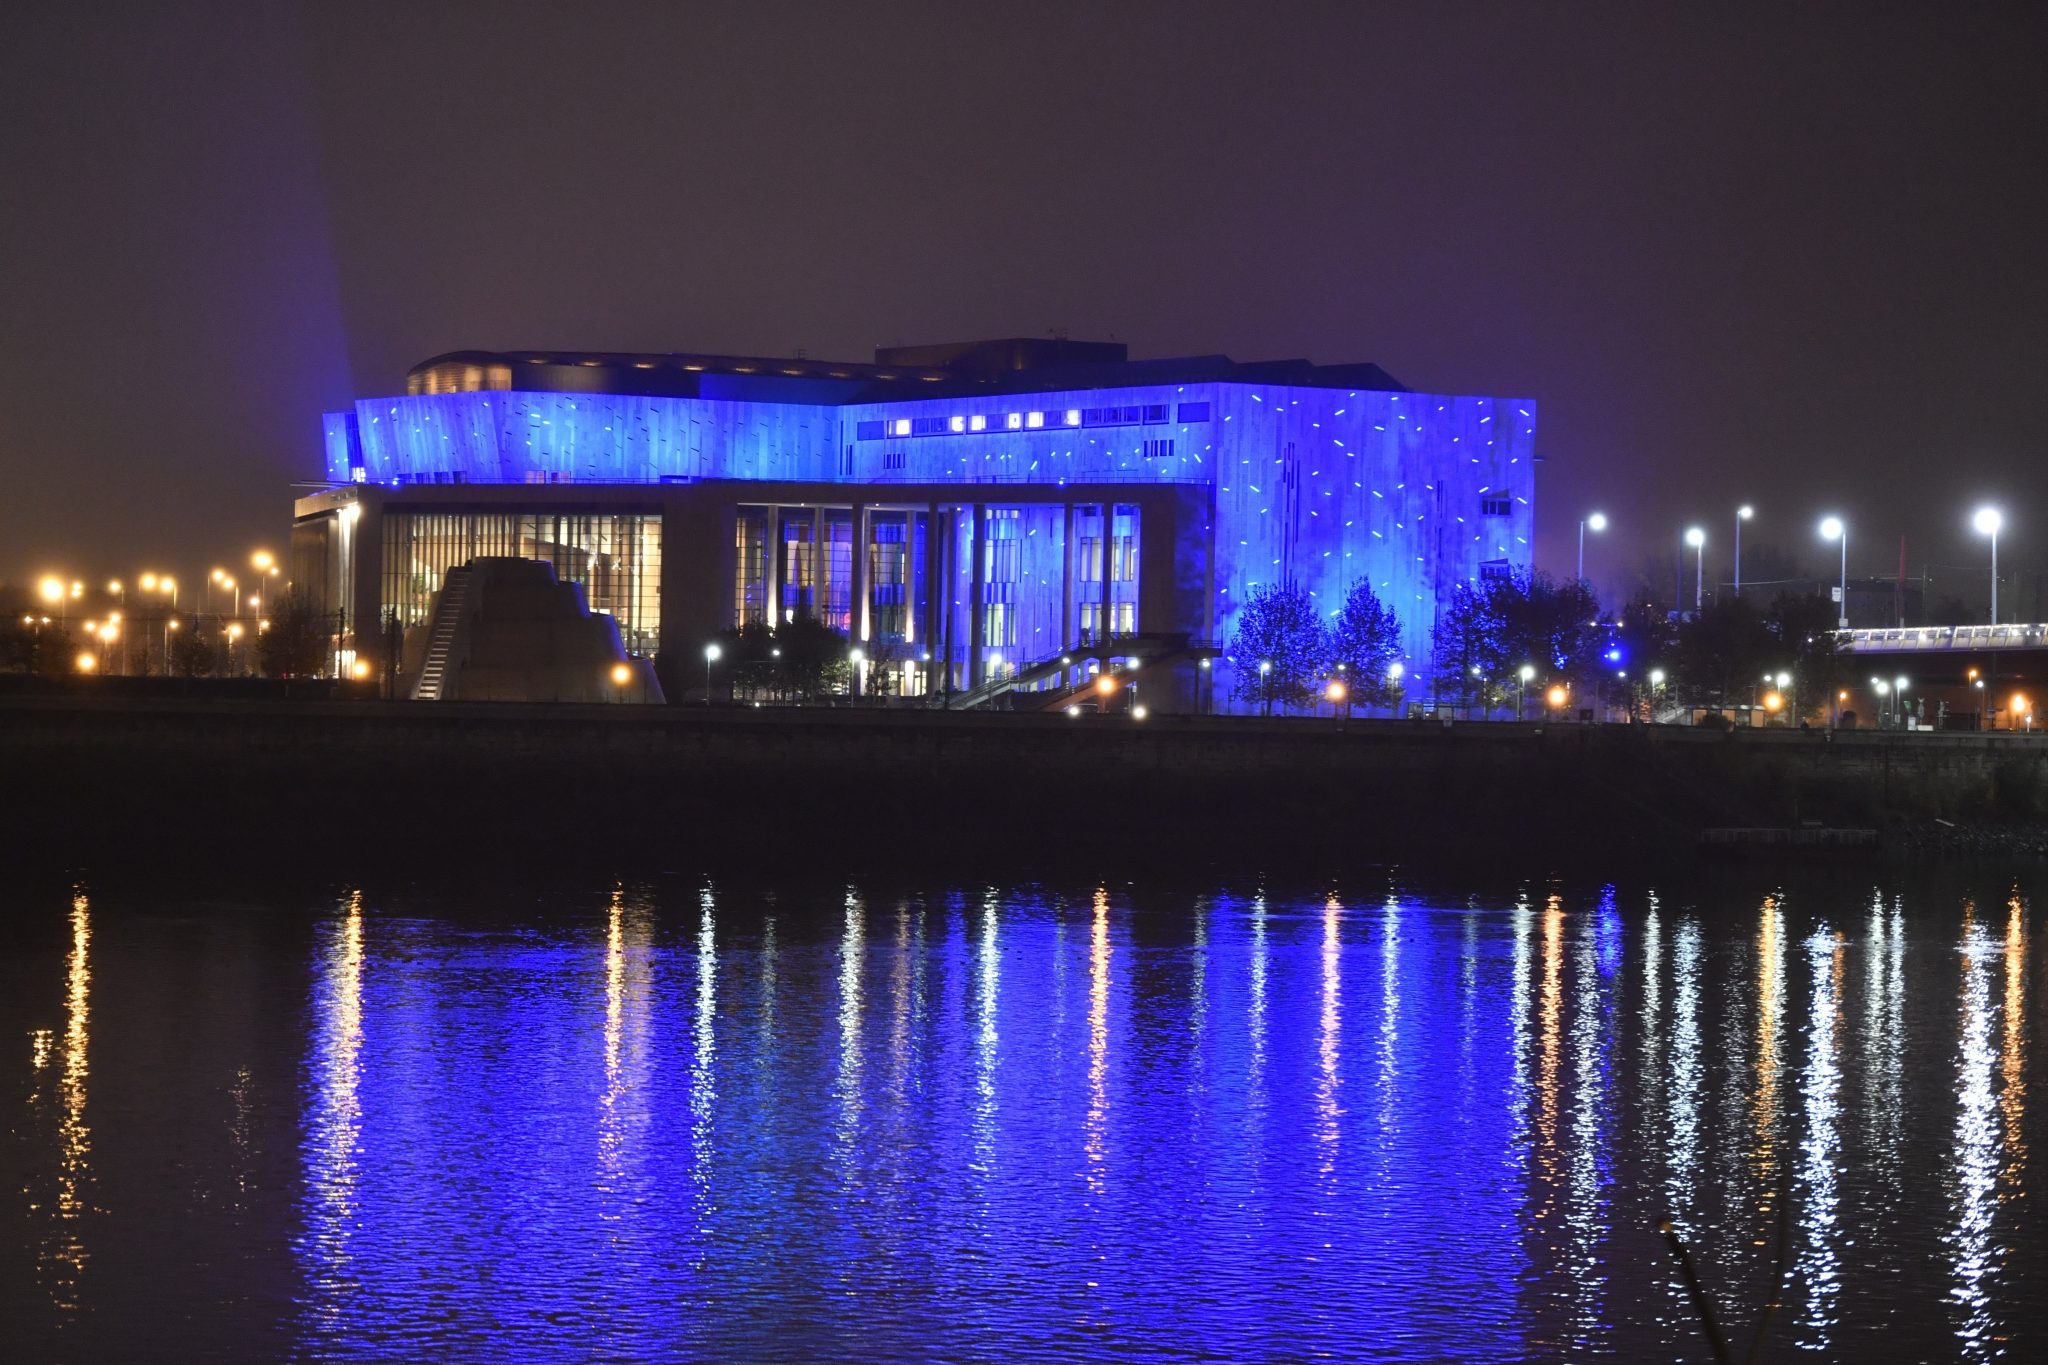 Palace of Arts to celebrate 15th anniversary in 2020 with star-studded season